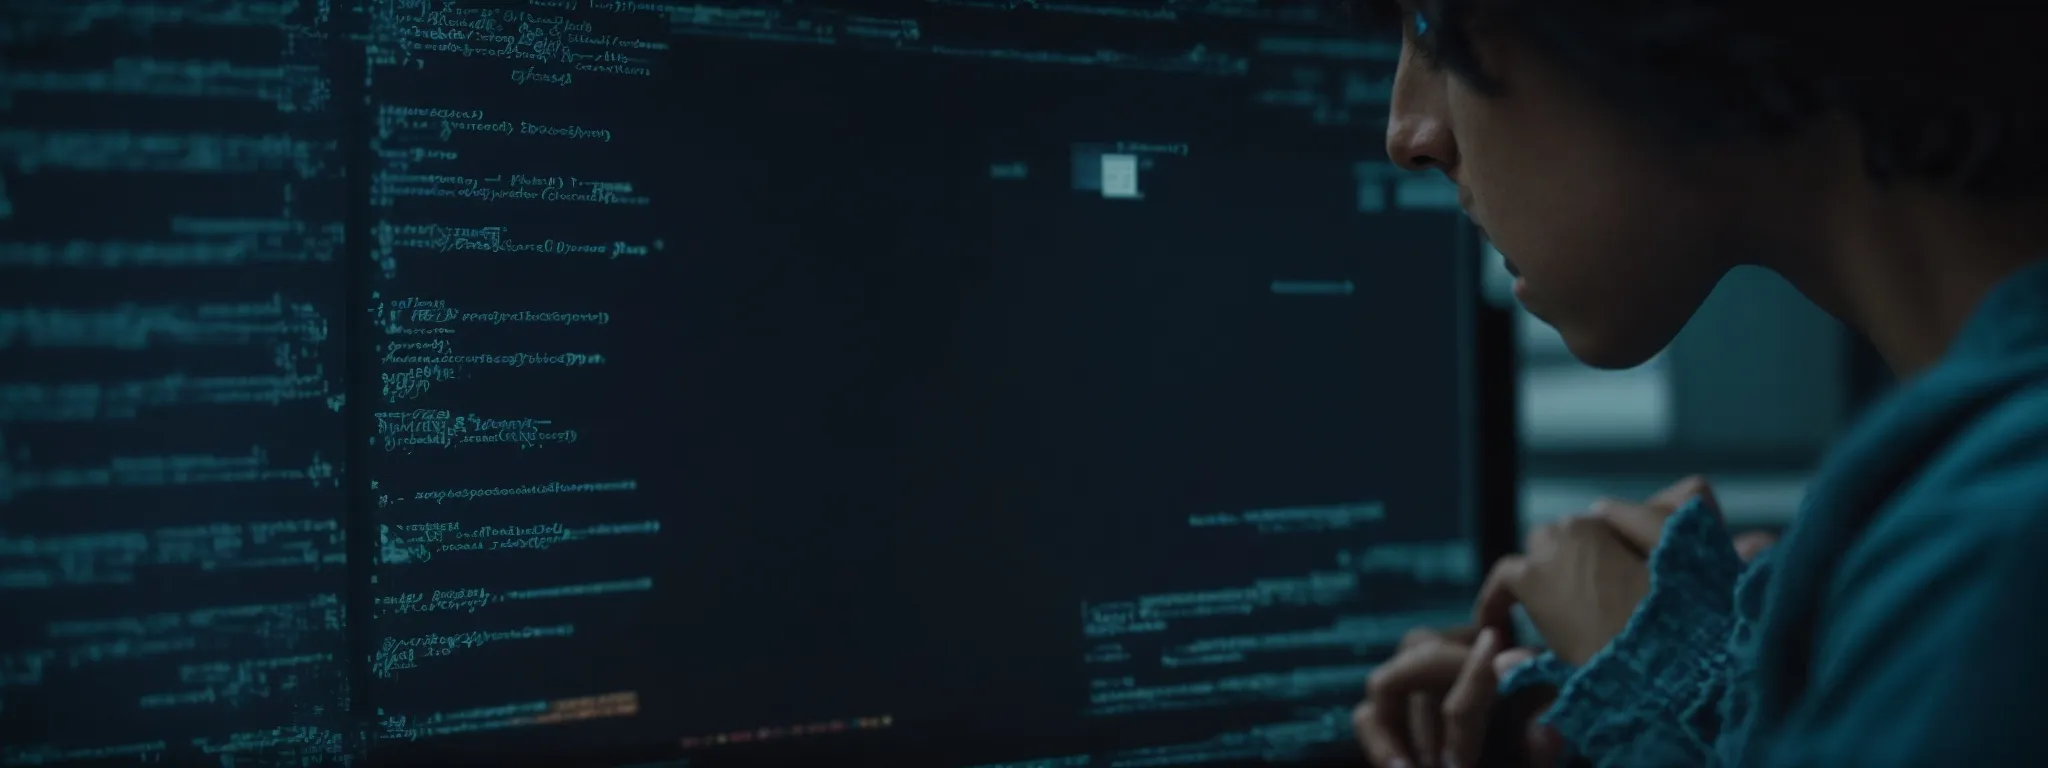 a web developer intently scrutinizes code on a computer screen, symbolizing the intricate work of optimizing multiple websites for search engines.